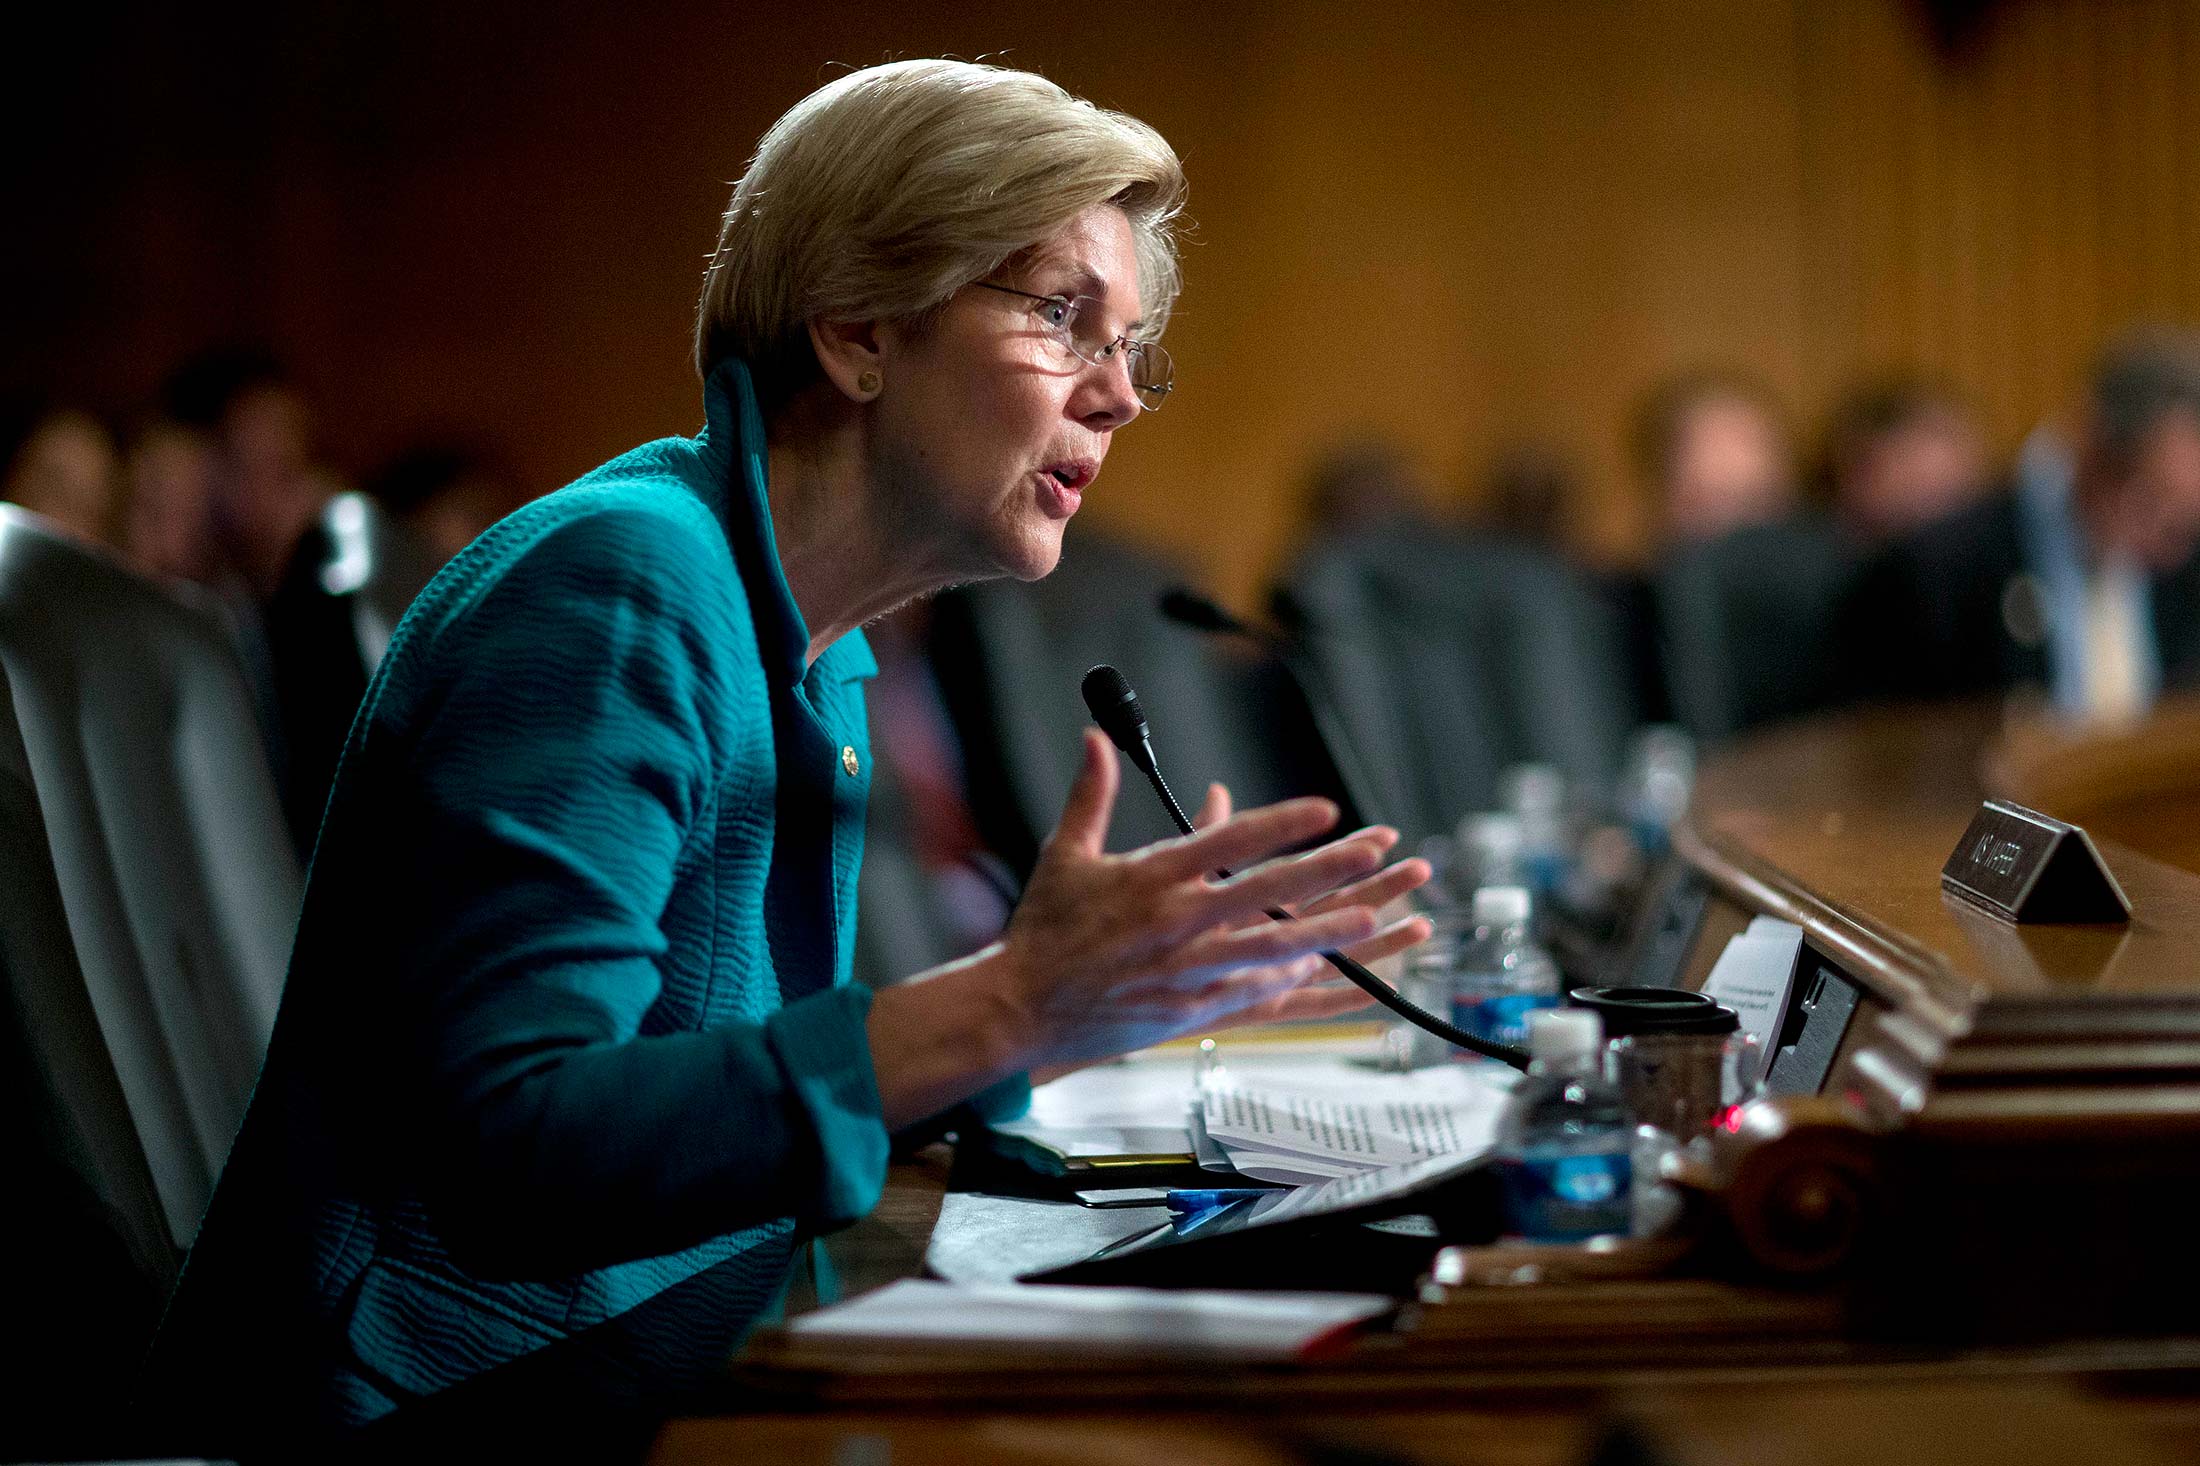 After the Fed released an initial proposal almost two years ago, a bipartisan group of lawmakers including Democratic Senator Elizabeth Warren complained that it didn’t go far enough.
